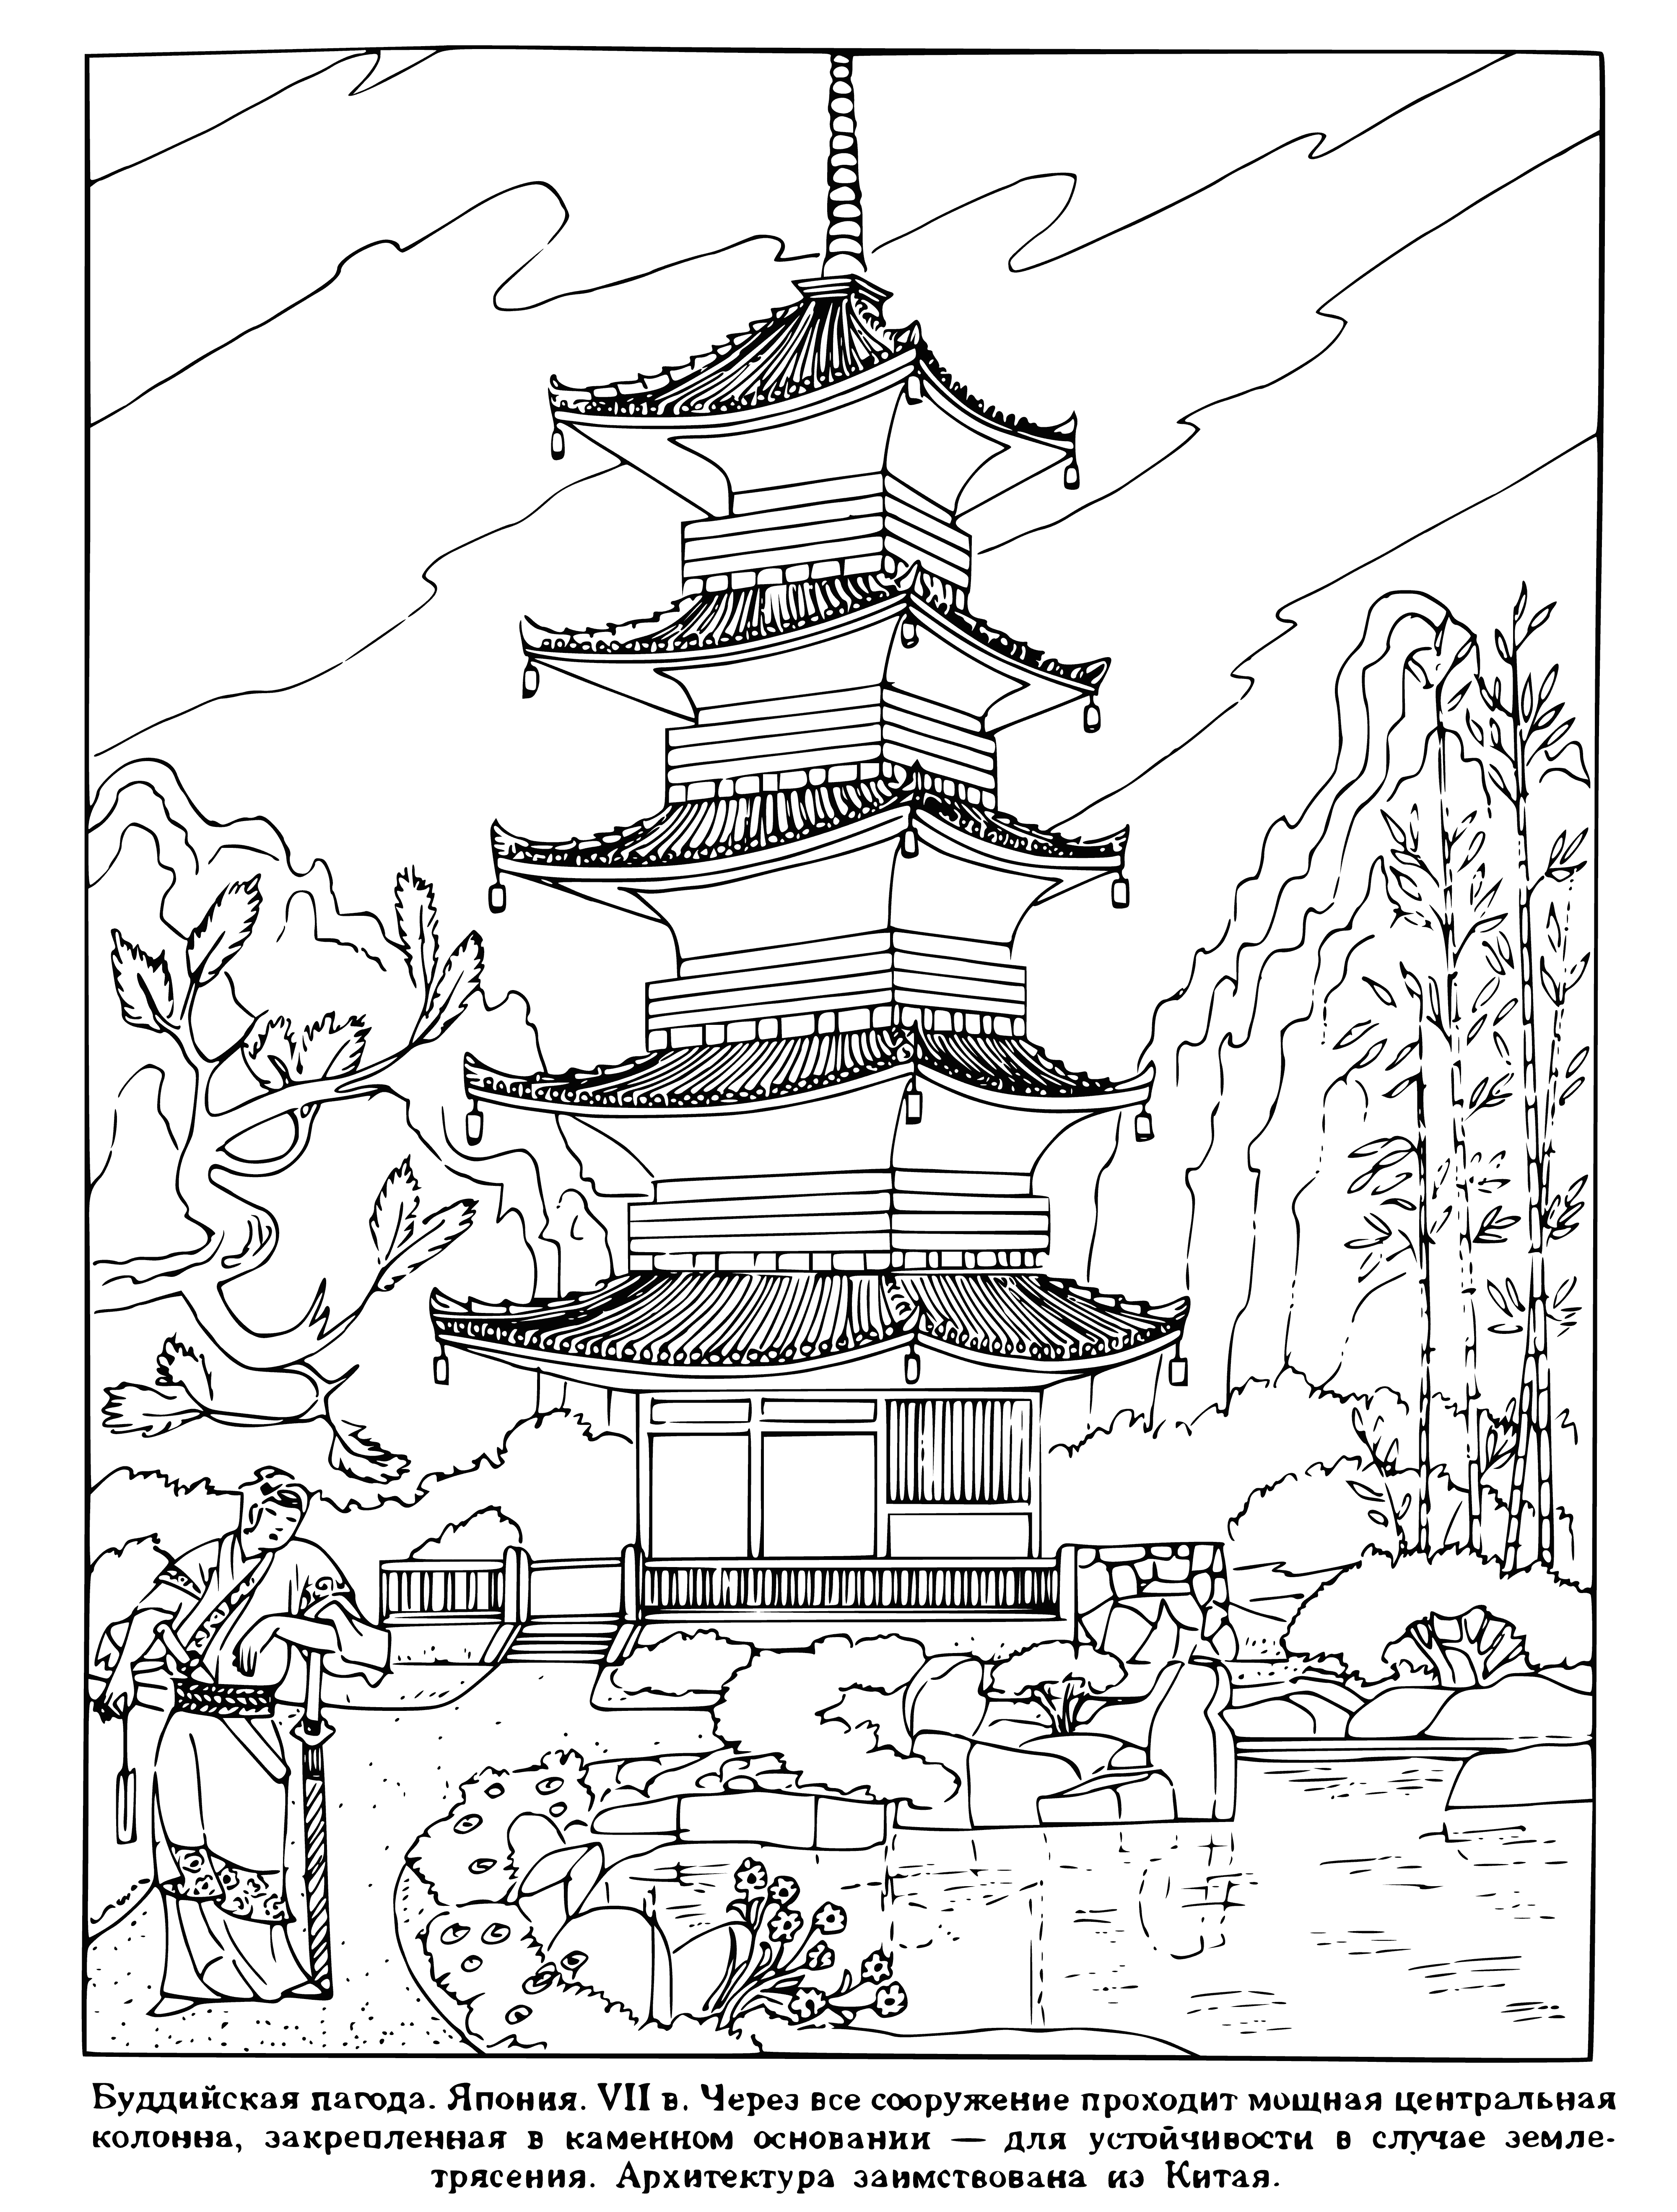 coloring page: A Buddhist pagoda is an ornate, multi-story structure, often with a square or cruciform base, surrounded by a colonnade & topped with a finial &/or stupa.